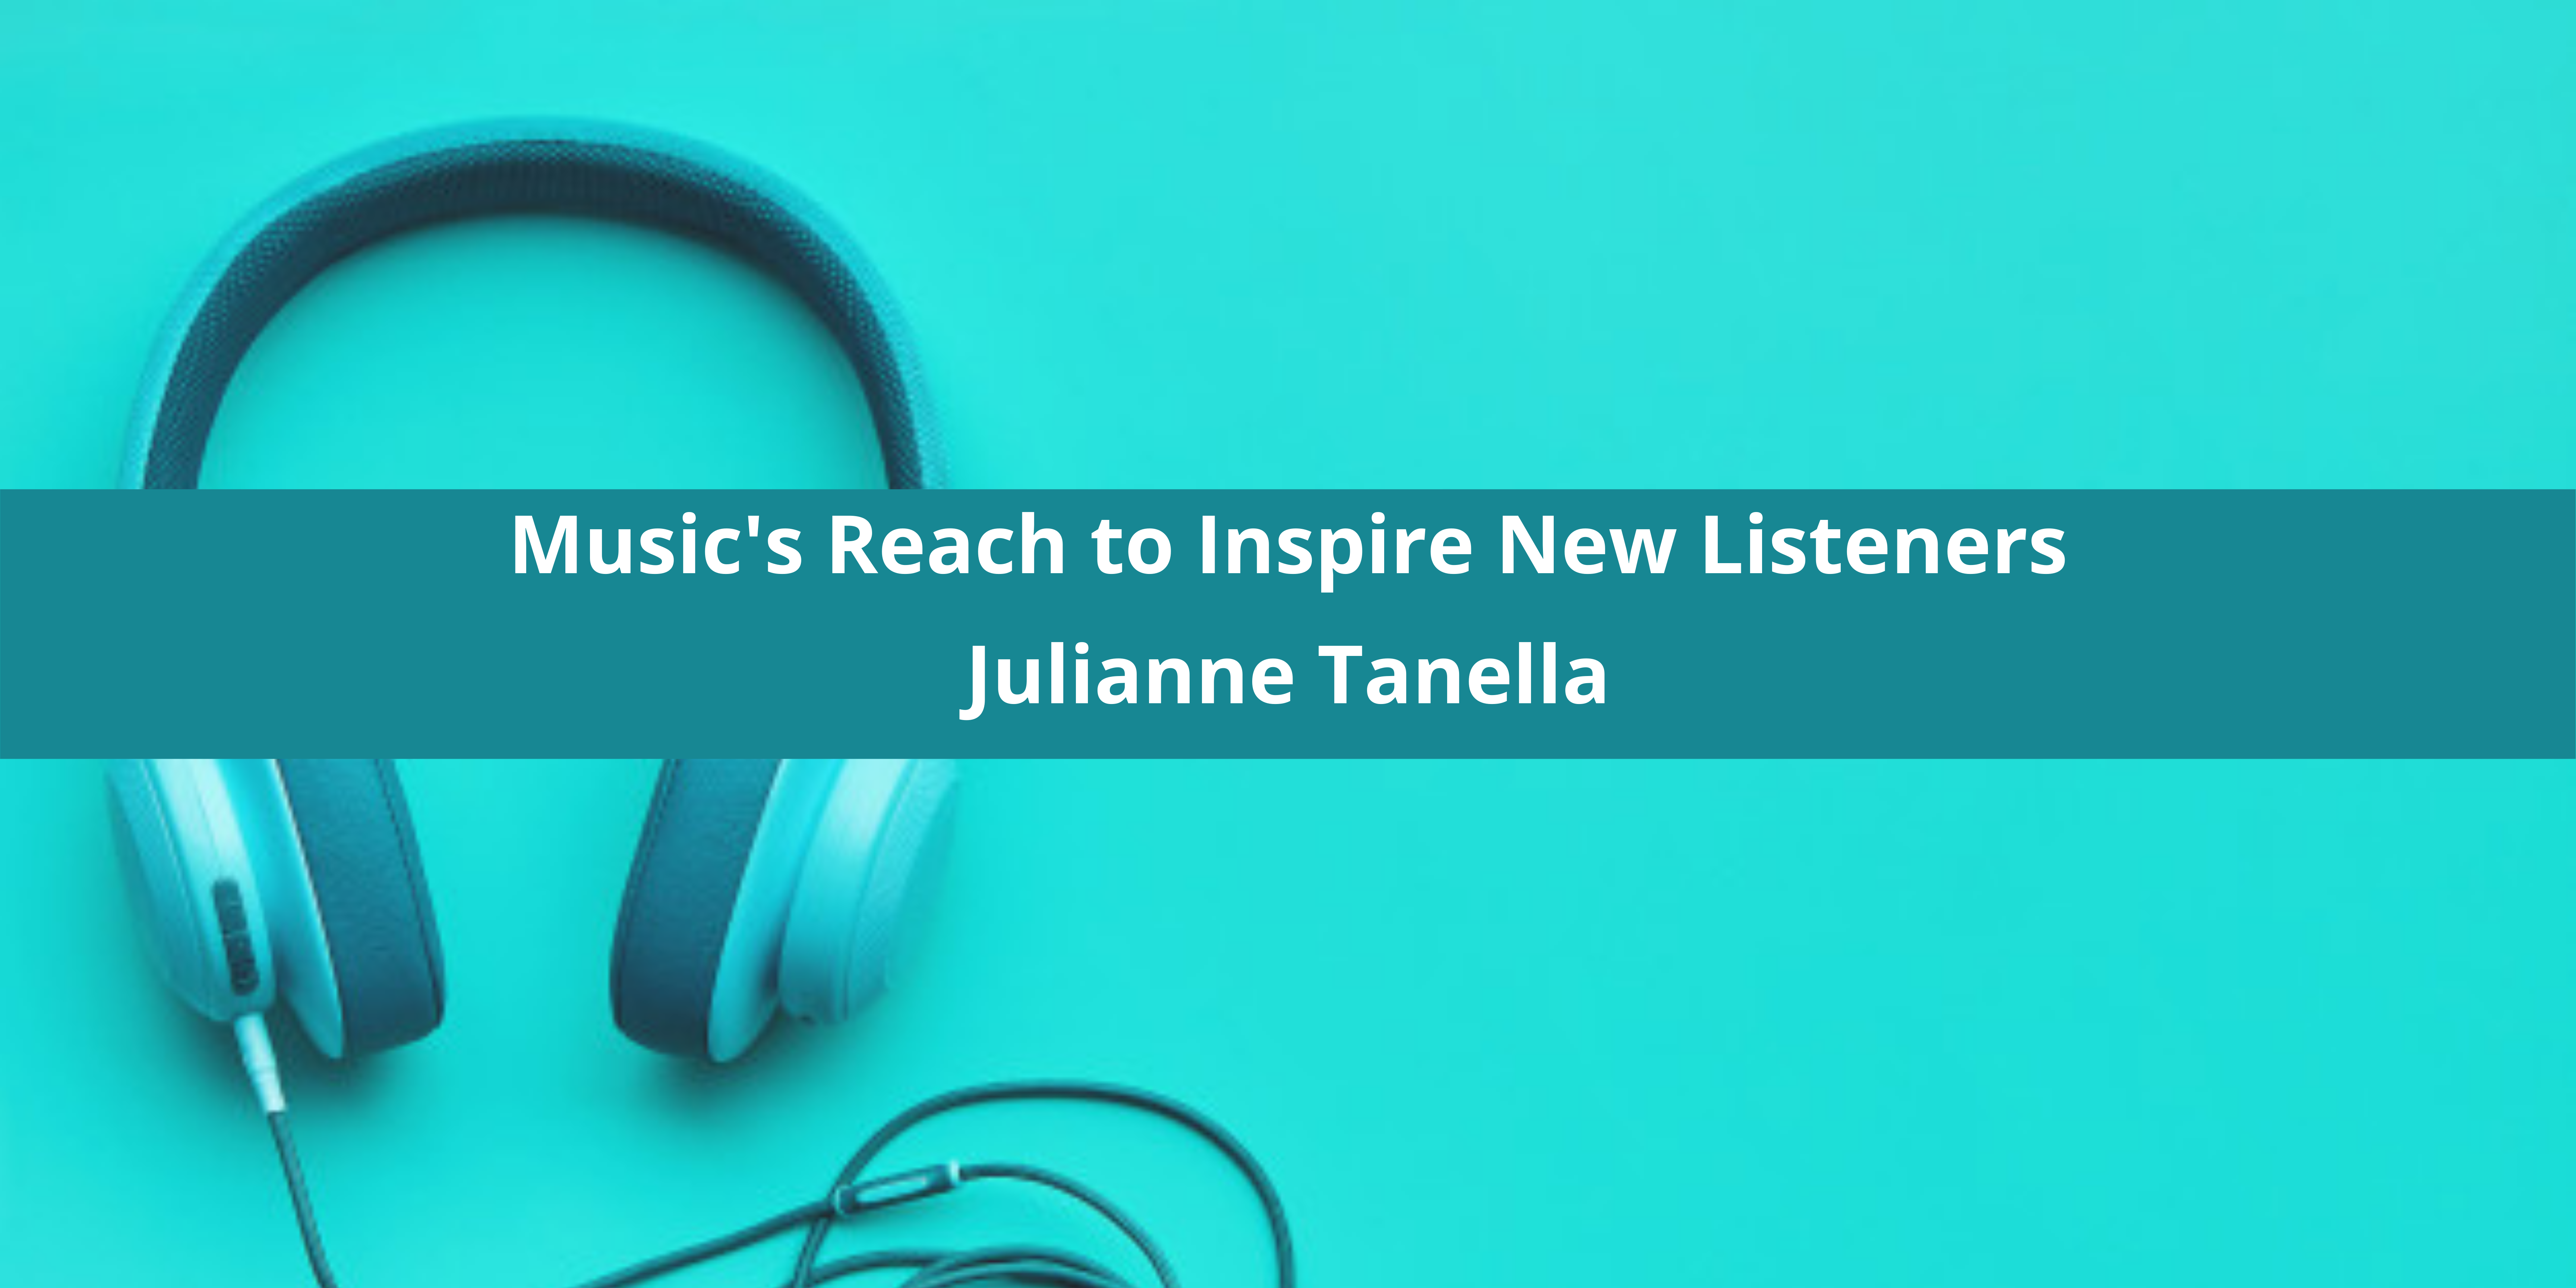 Julianne Tanella Expands Her Music's Reach to Inspire New Listeners